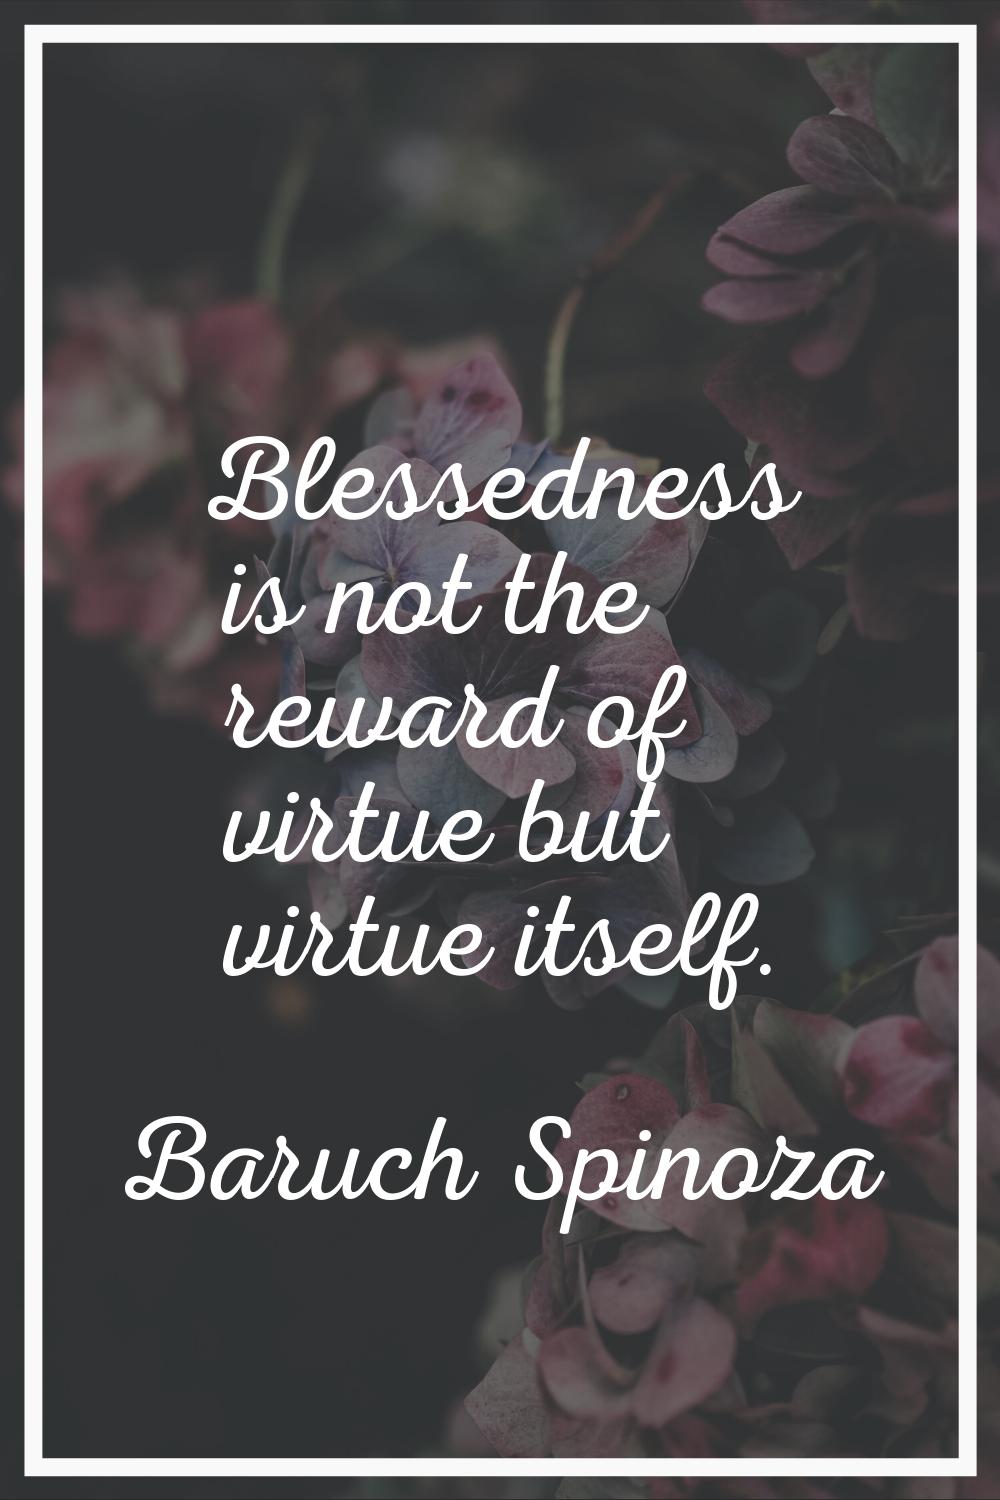 Blessedness is not the reward of virtue but virtue itself.